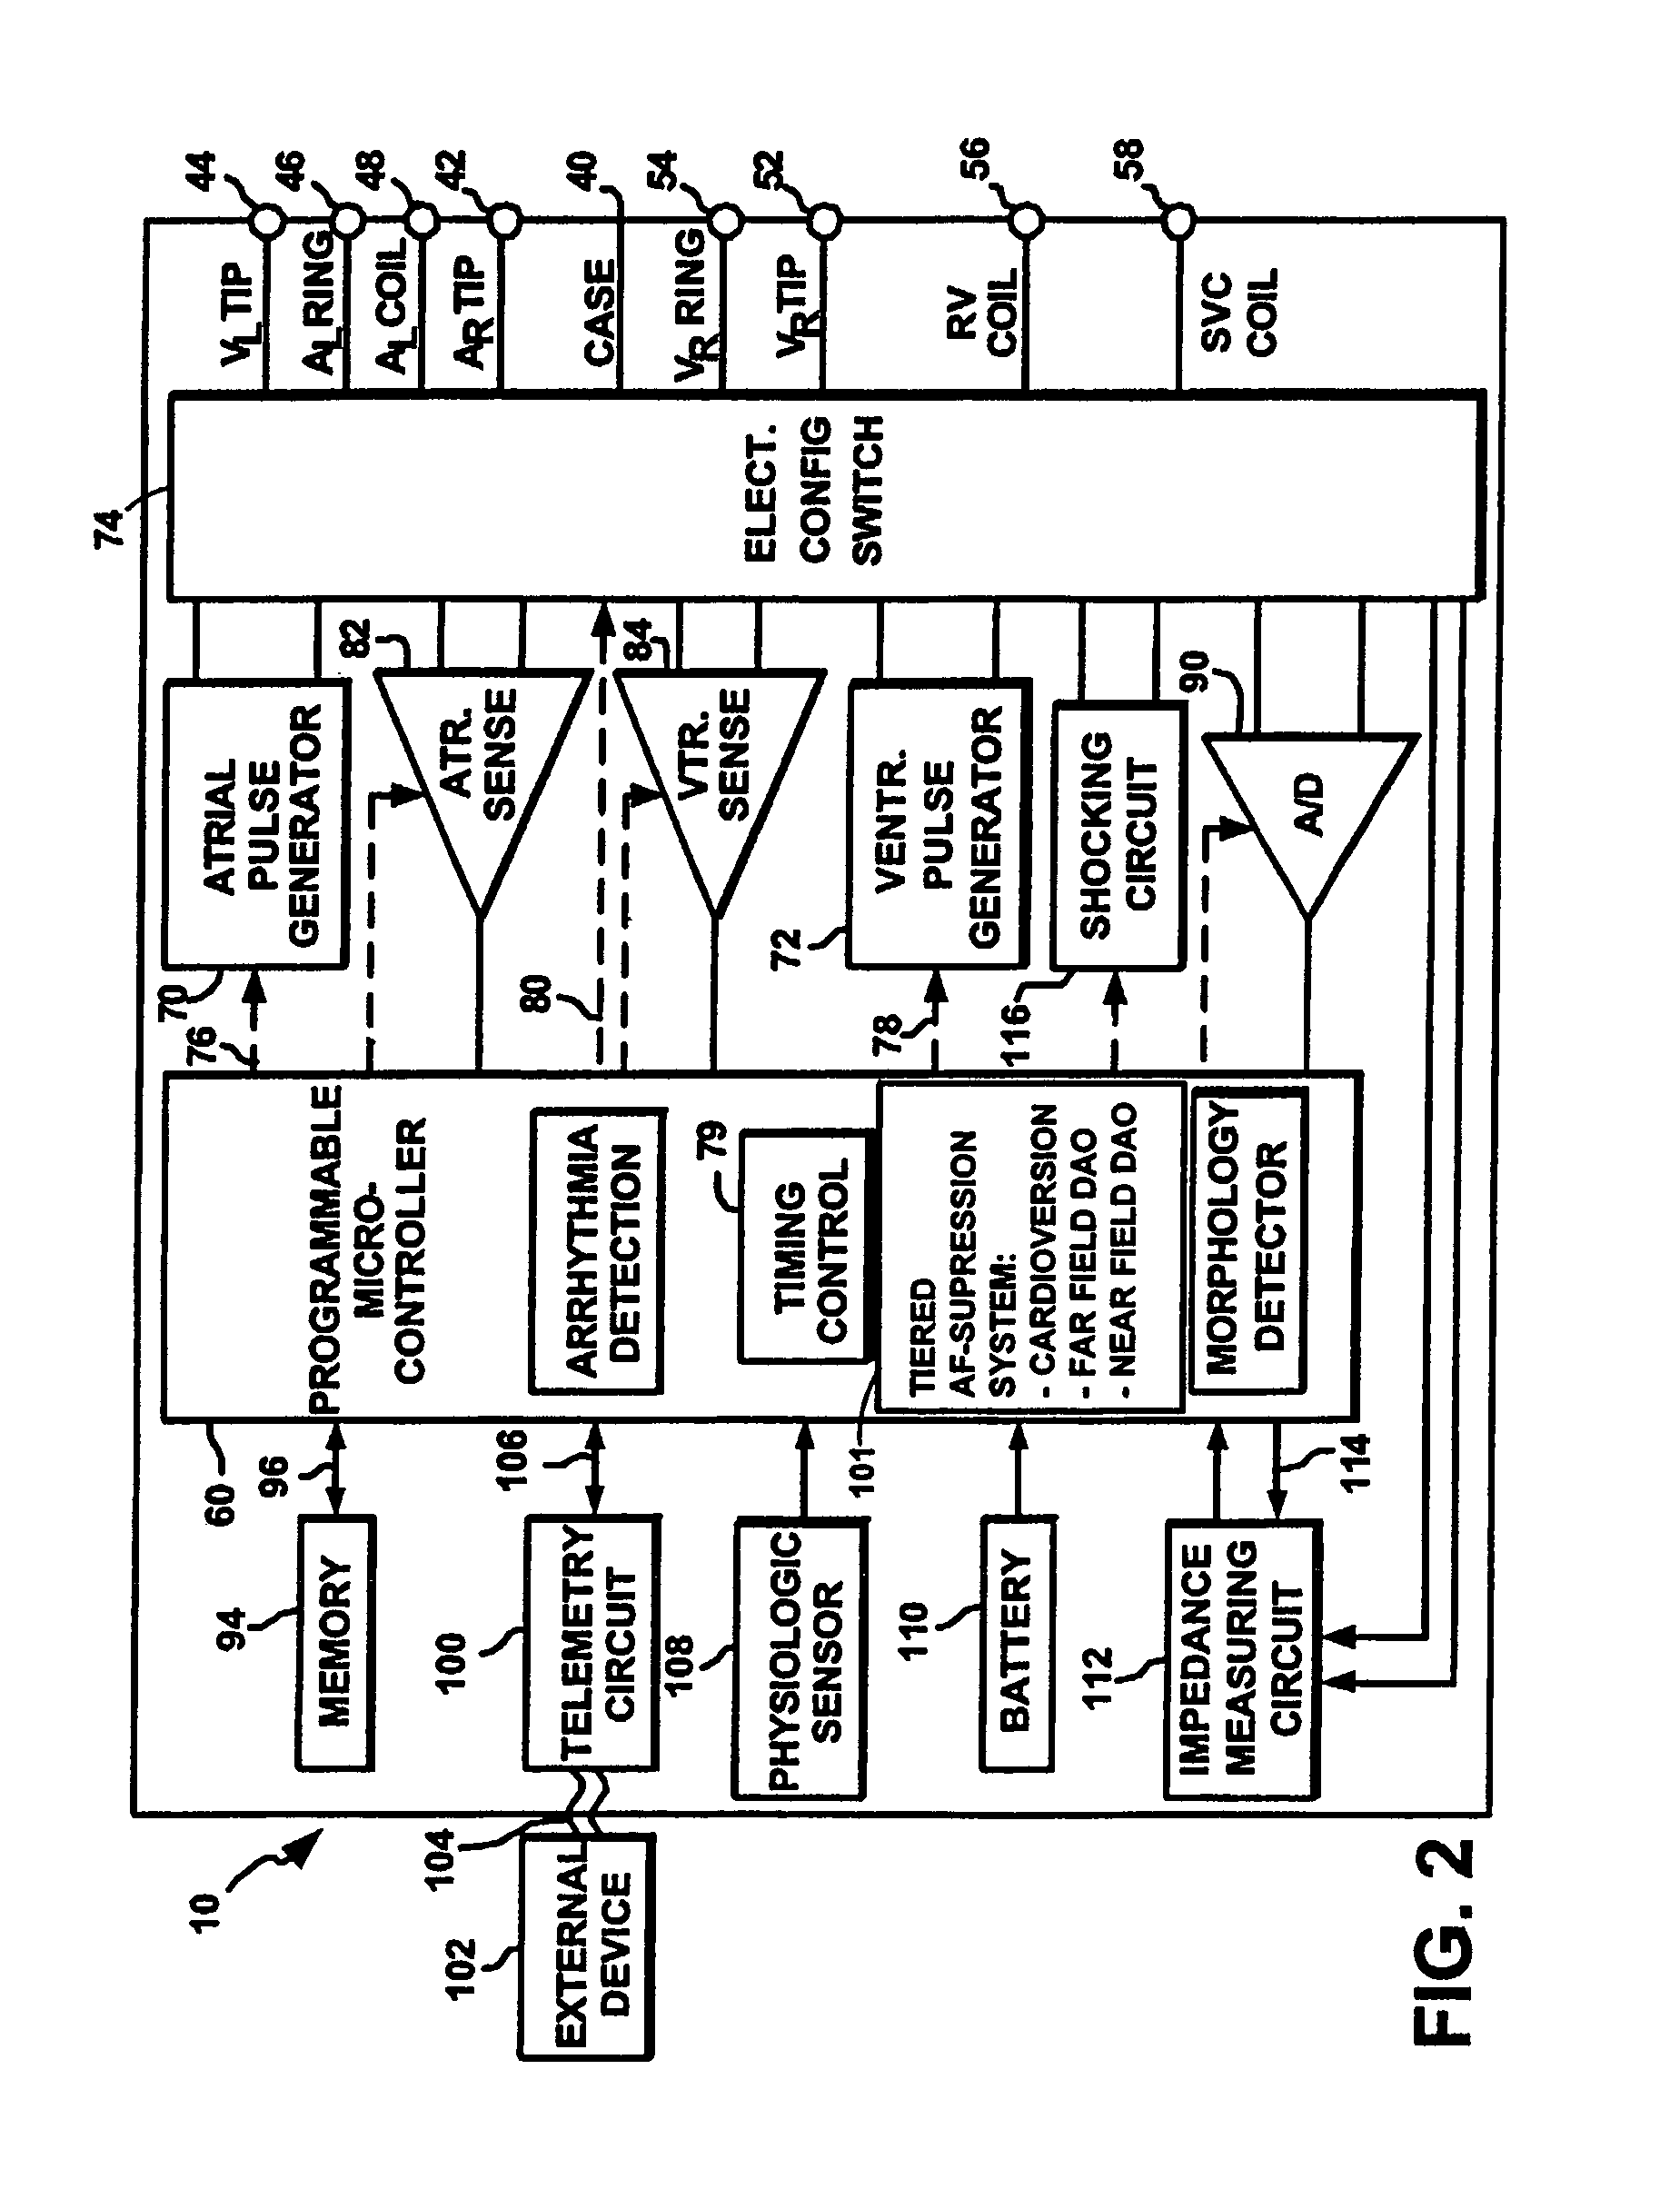 System and method for providing cardioversion therapy and overdrive pacing using an implantable cardiac stimulation device